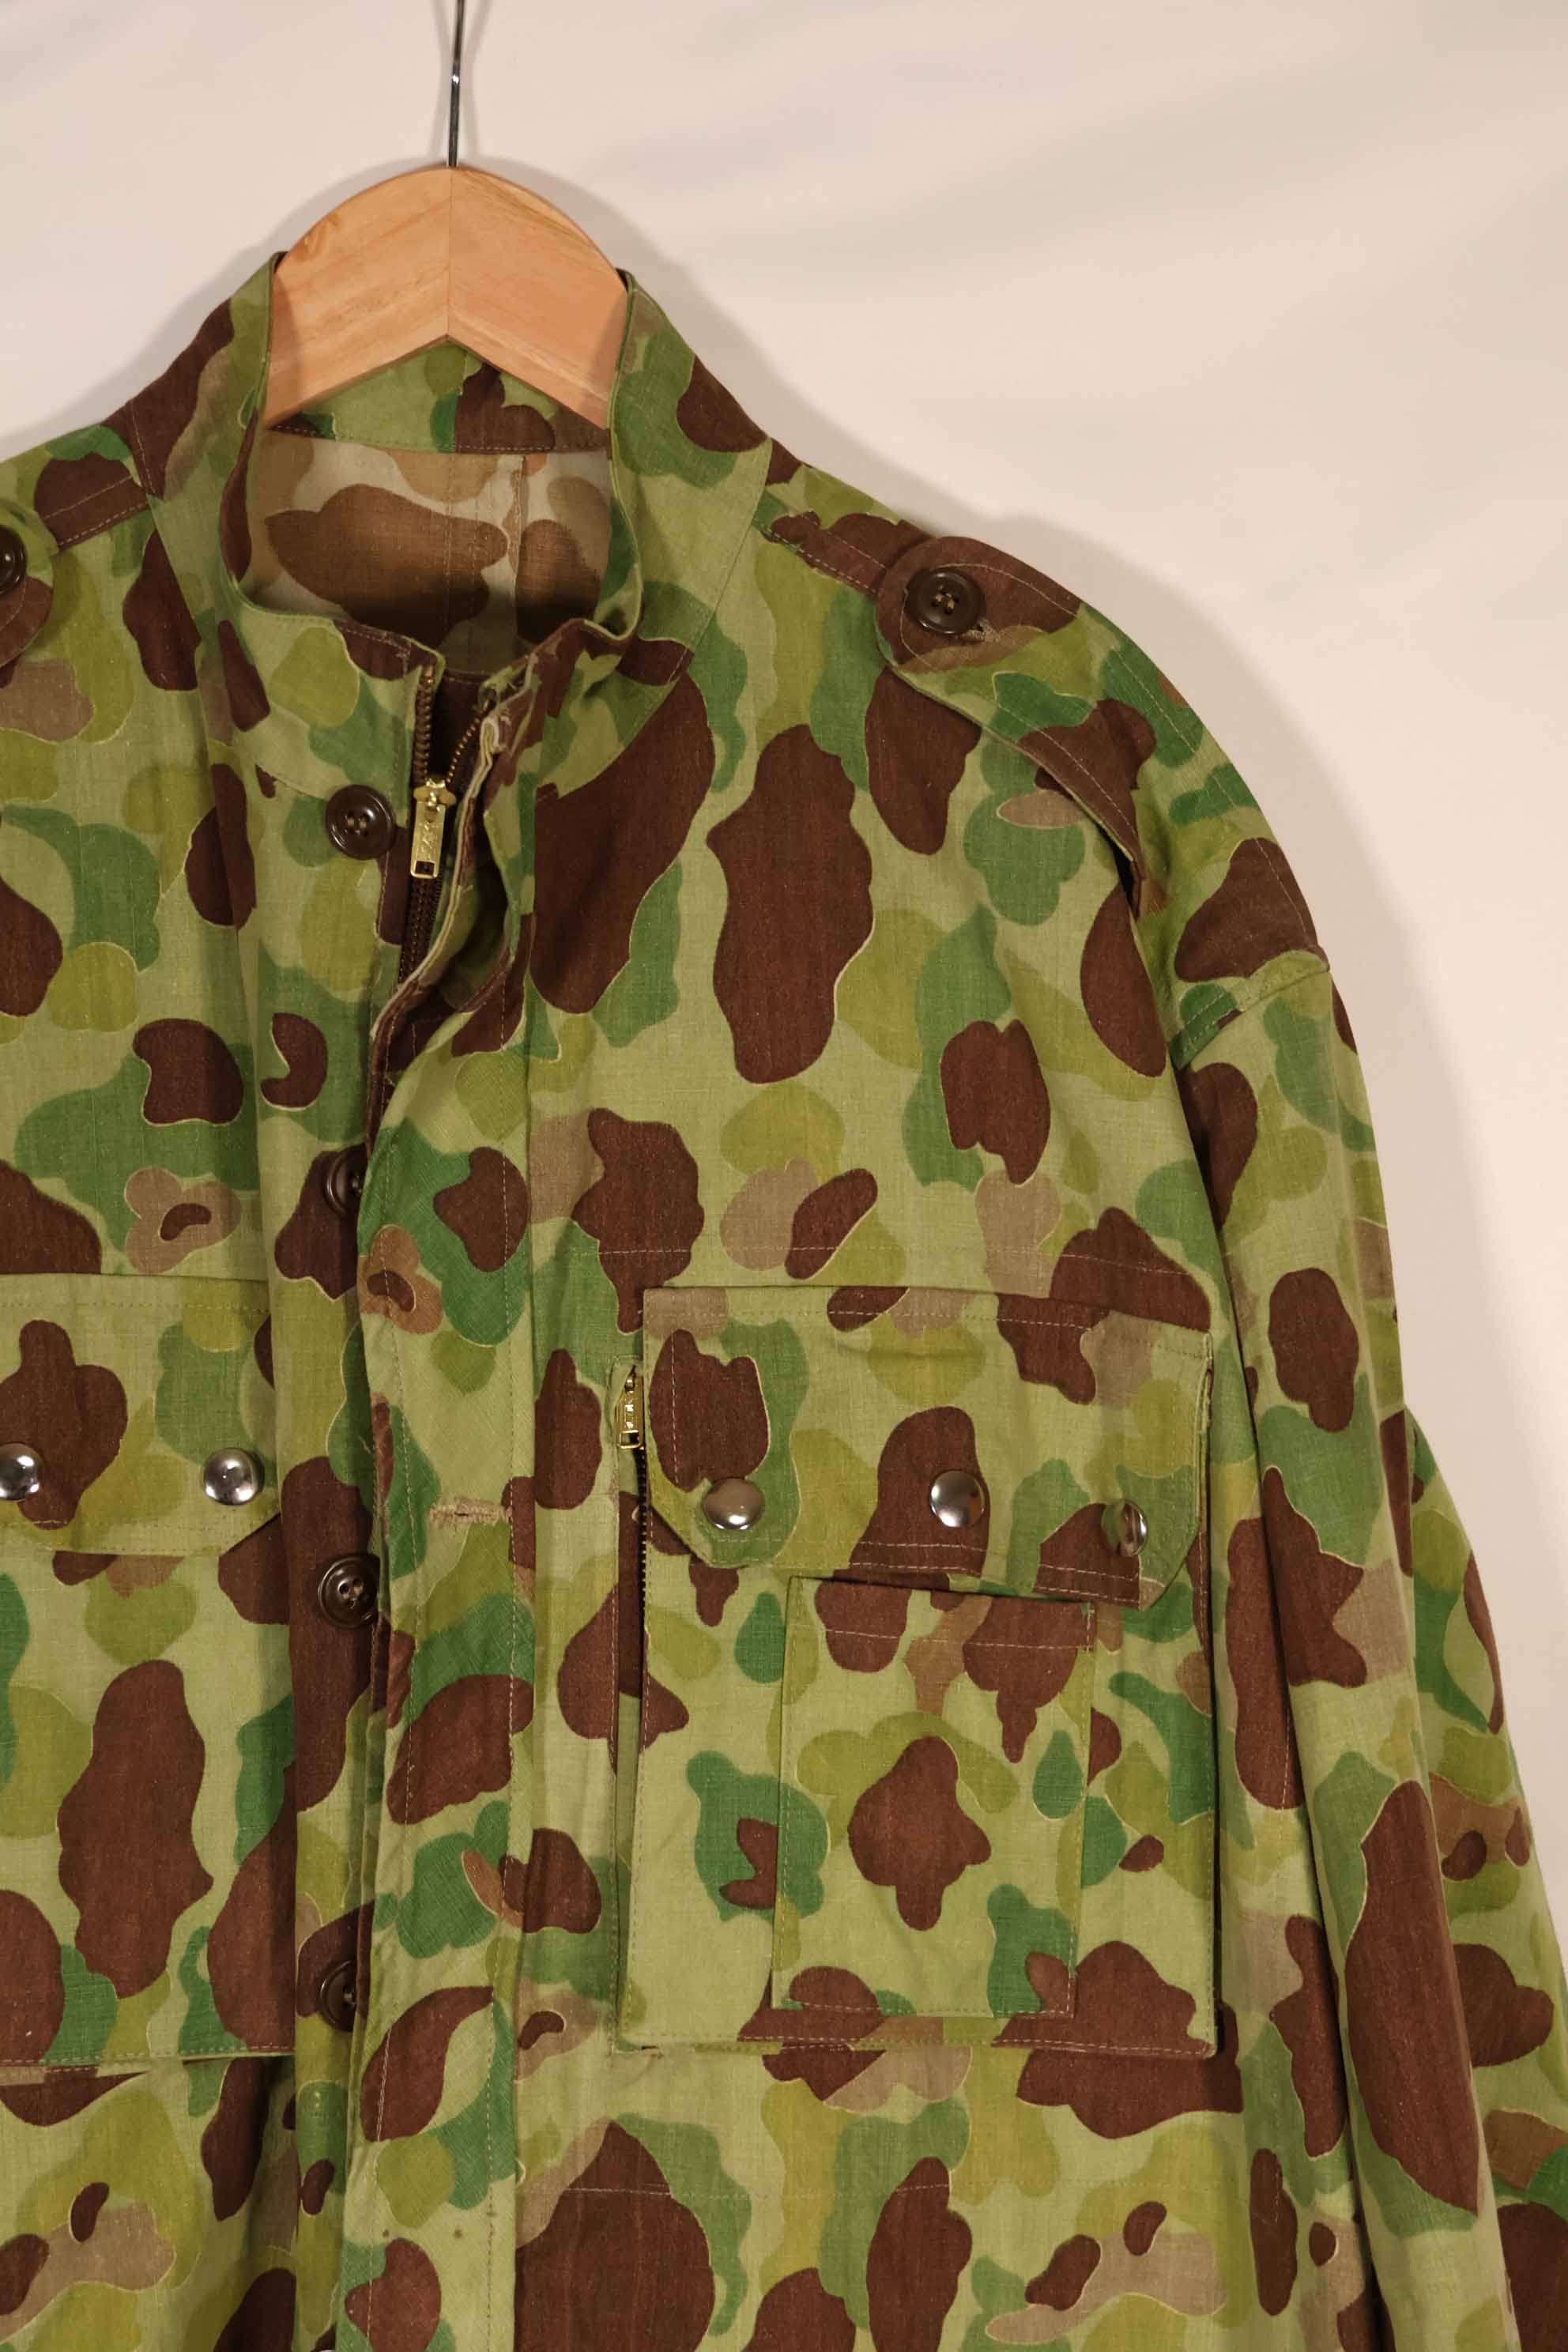 Real Fabric Replica Frogskin Camouflage French Army Airborne Jacket Cut Used